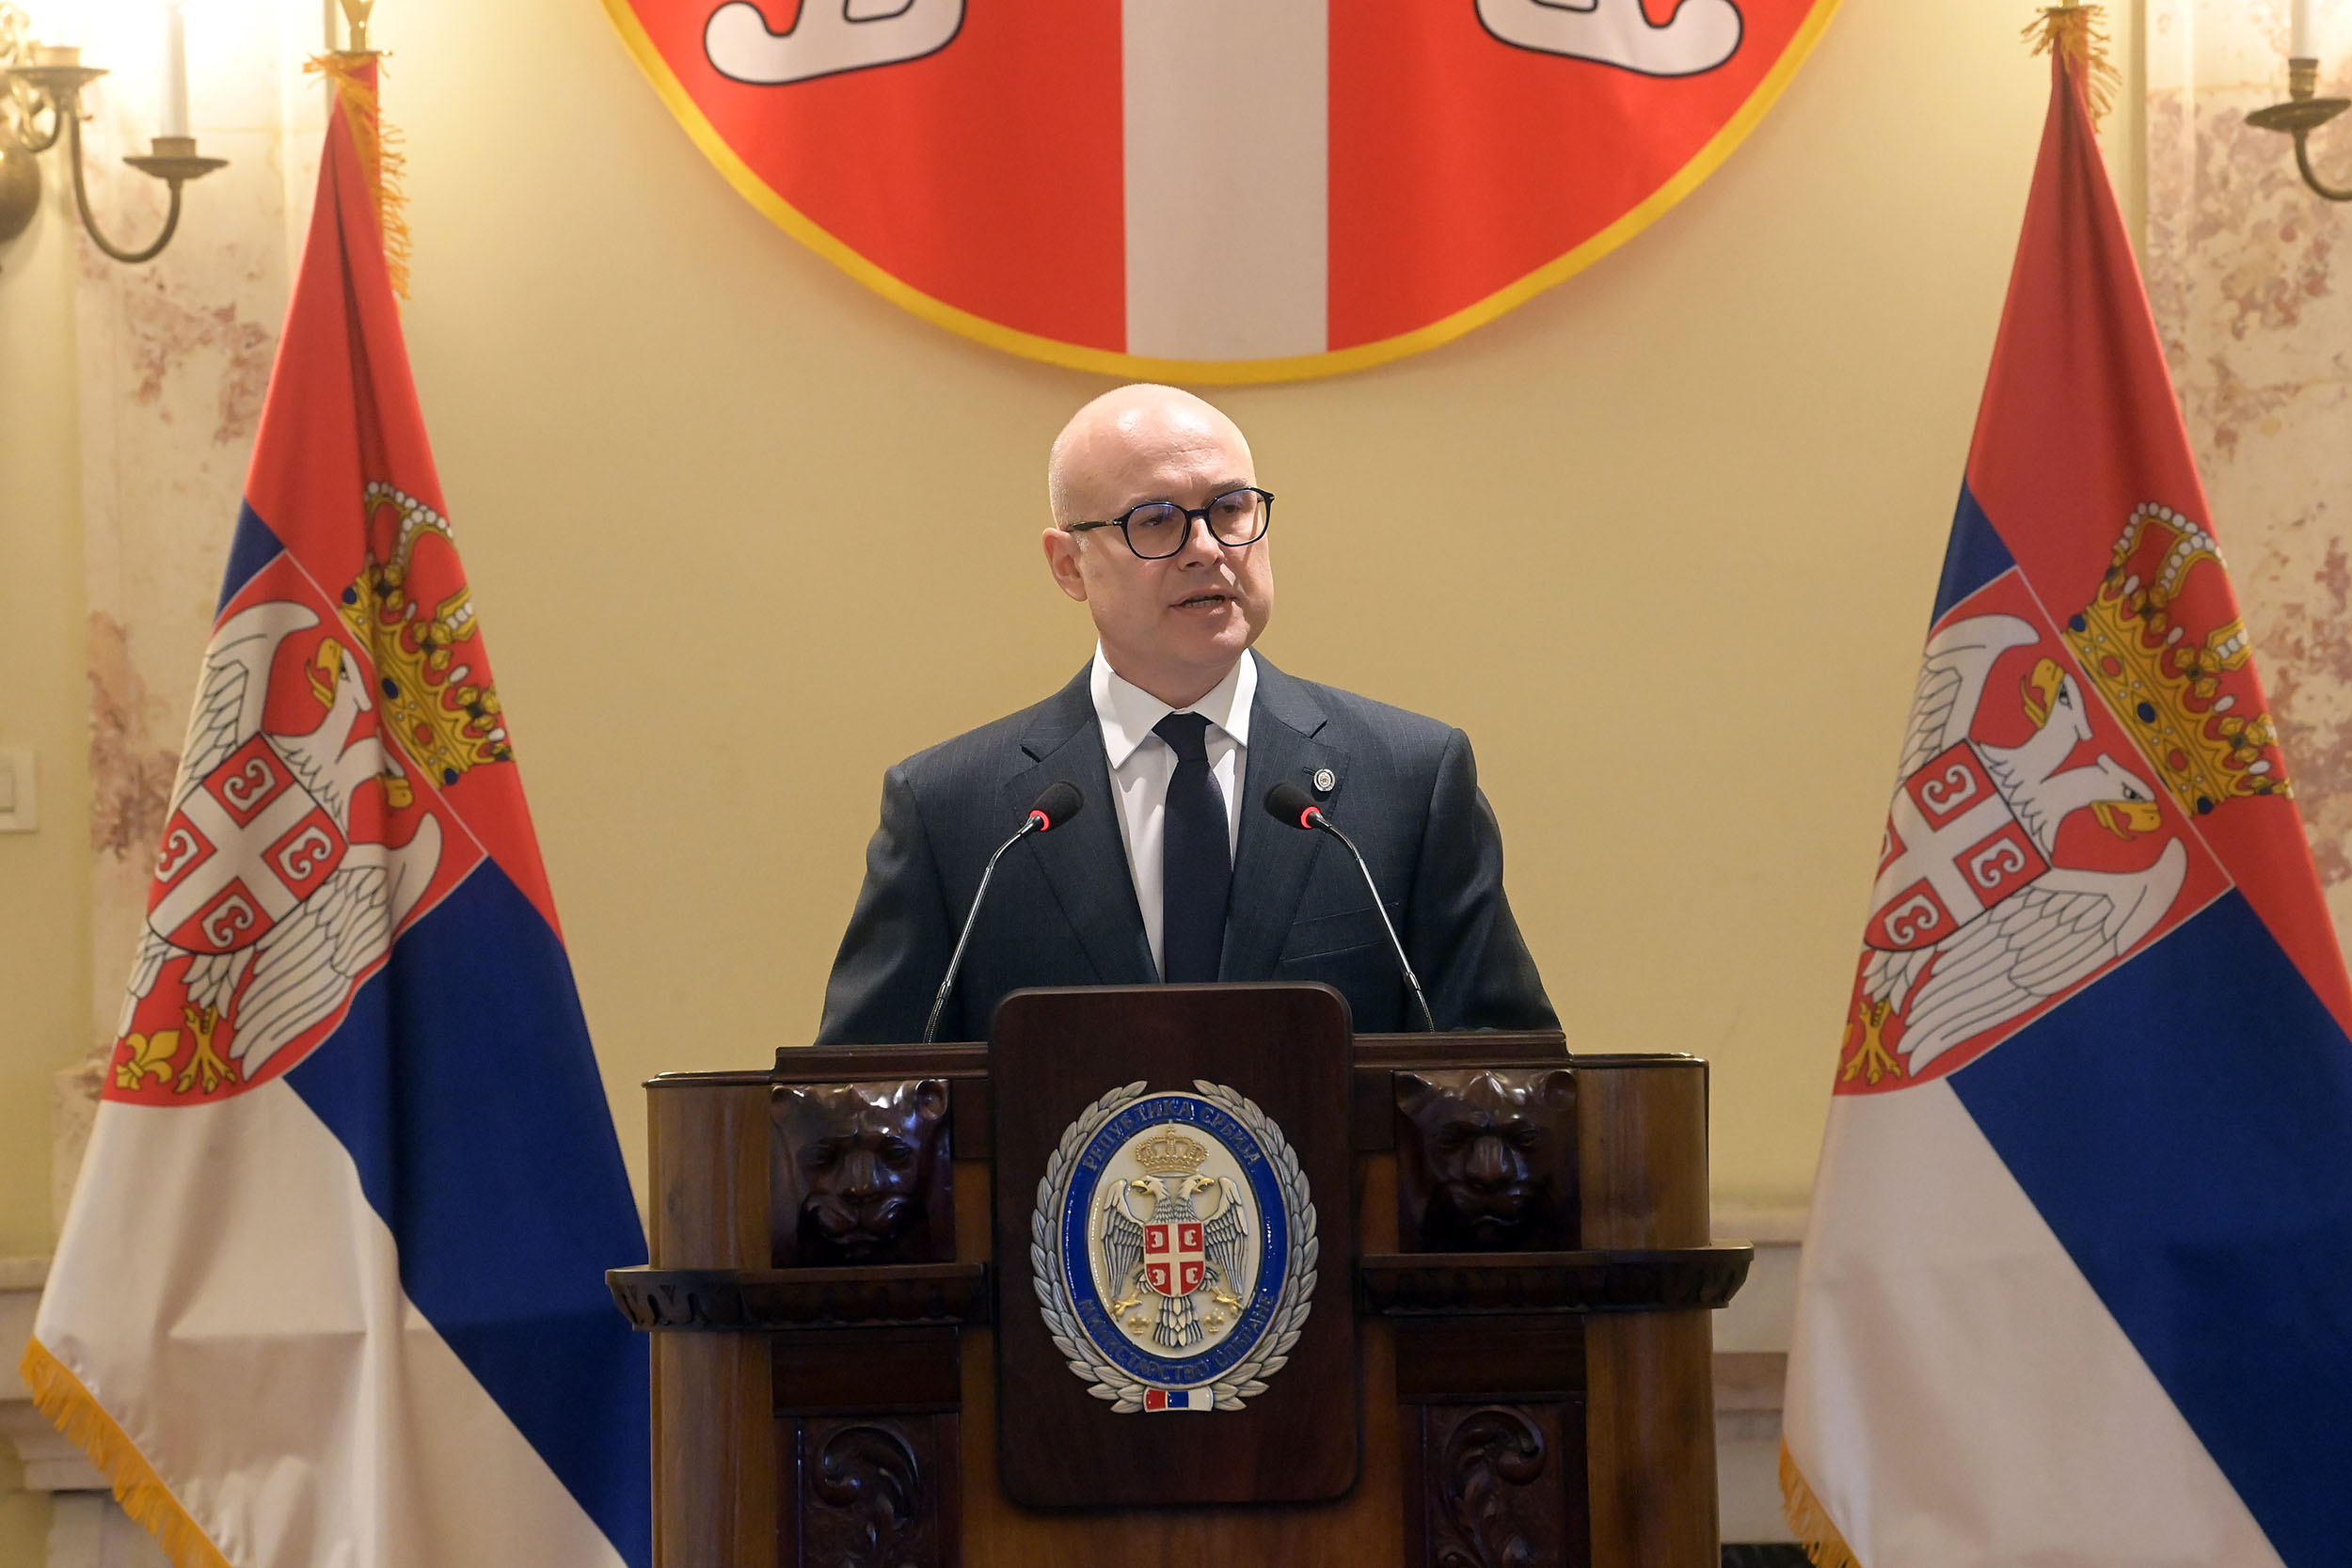 Minister Vučević presents decrees on promotions and appointments